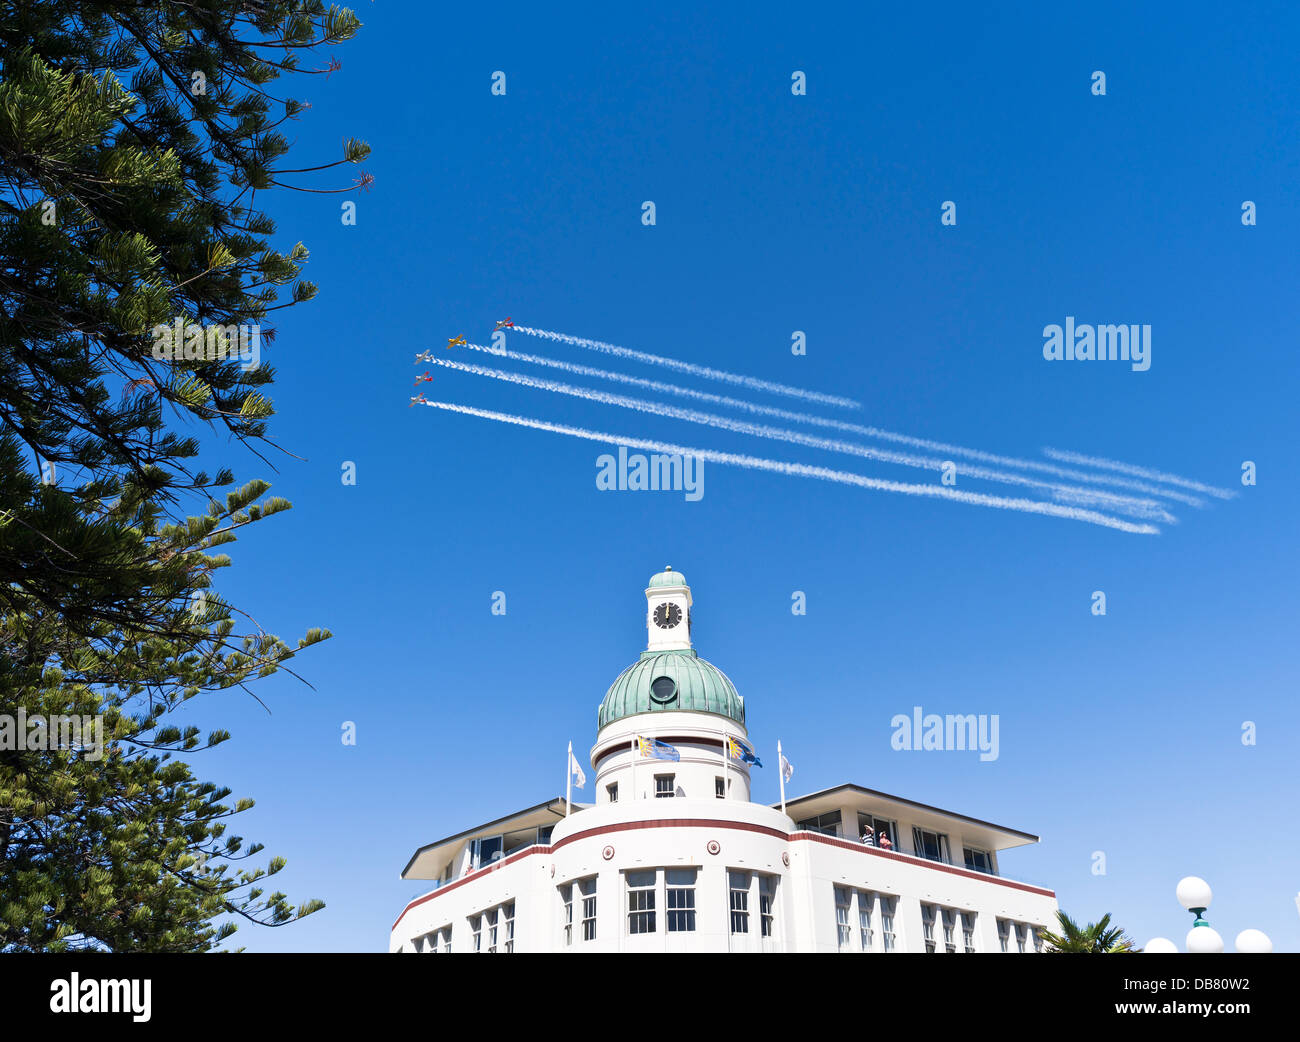 dh Art Deco weekend NAPIER FESTIVAL NEW ZEALAND NZ Aerobatic flying air display airplanes show dome plane Stock Photo